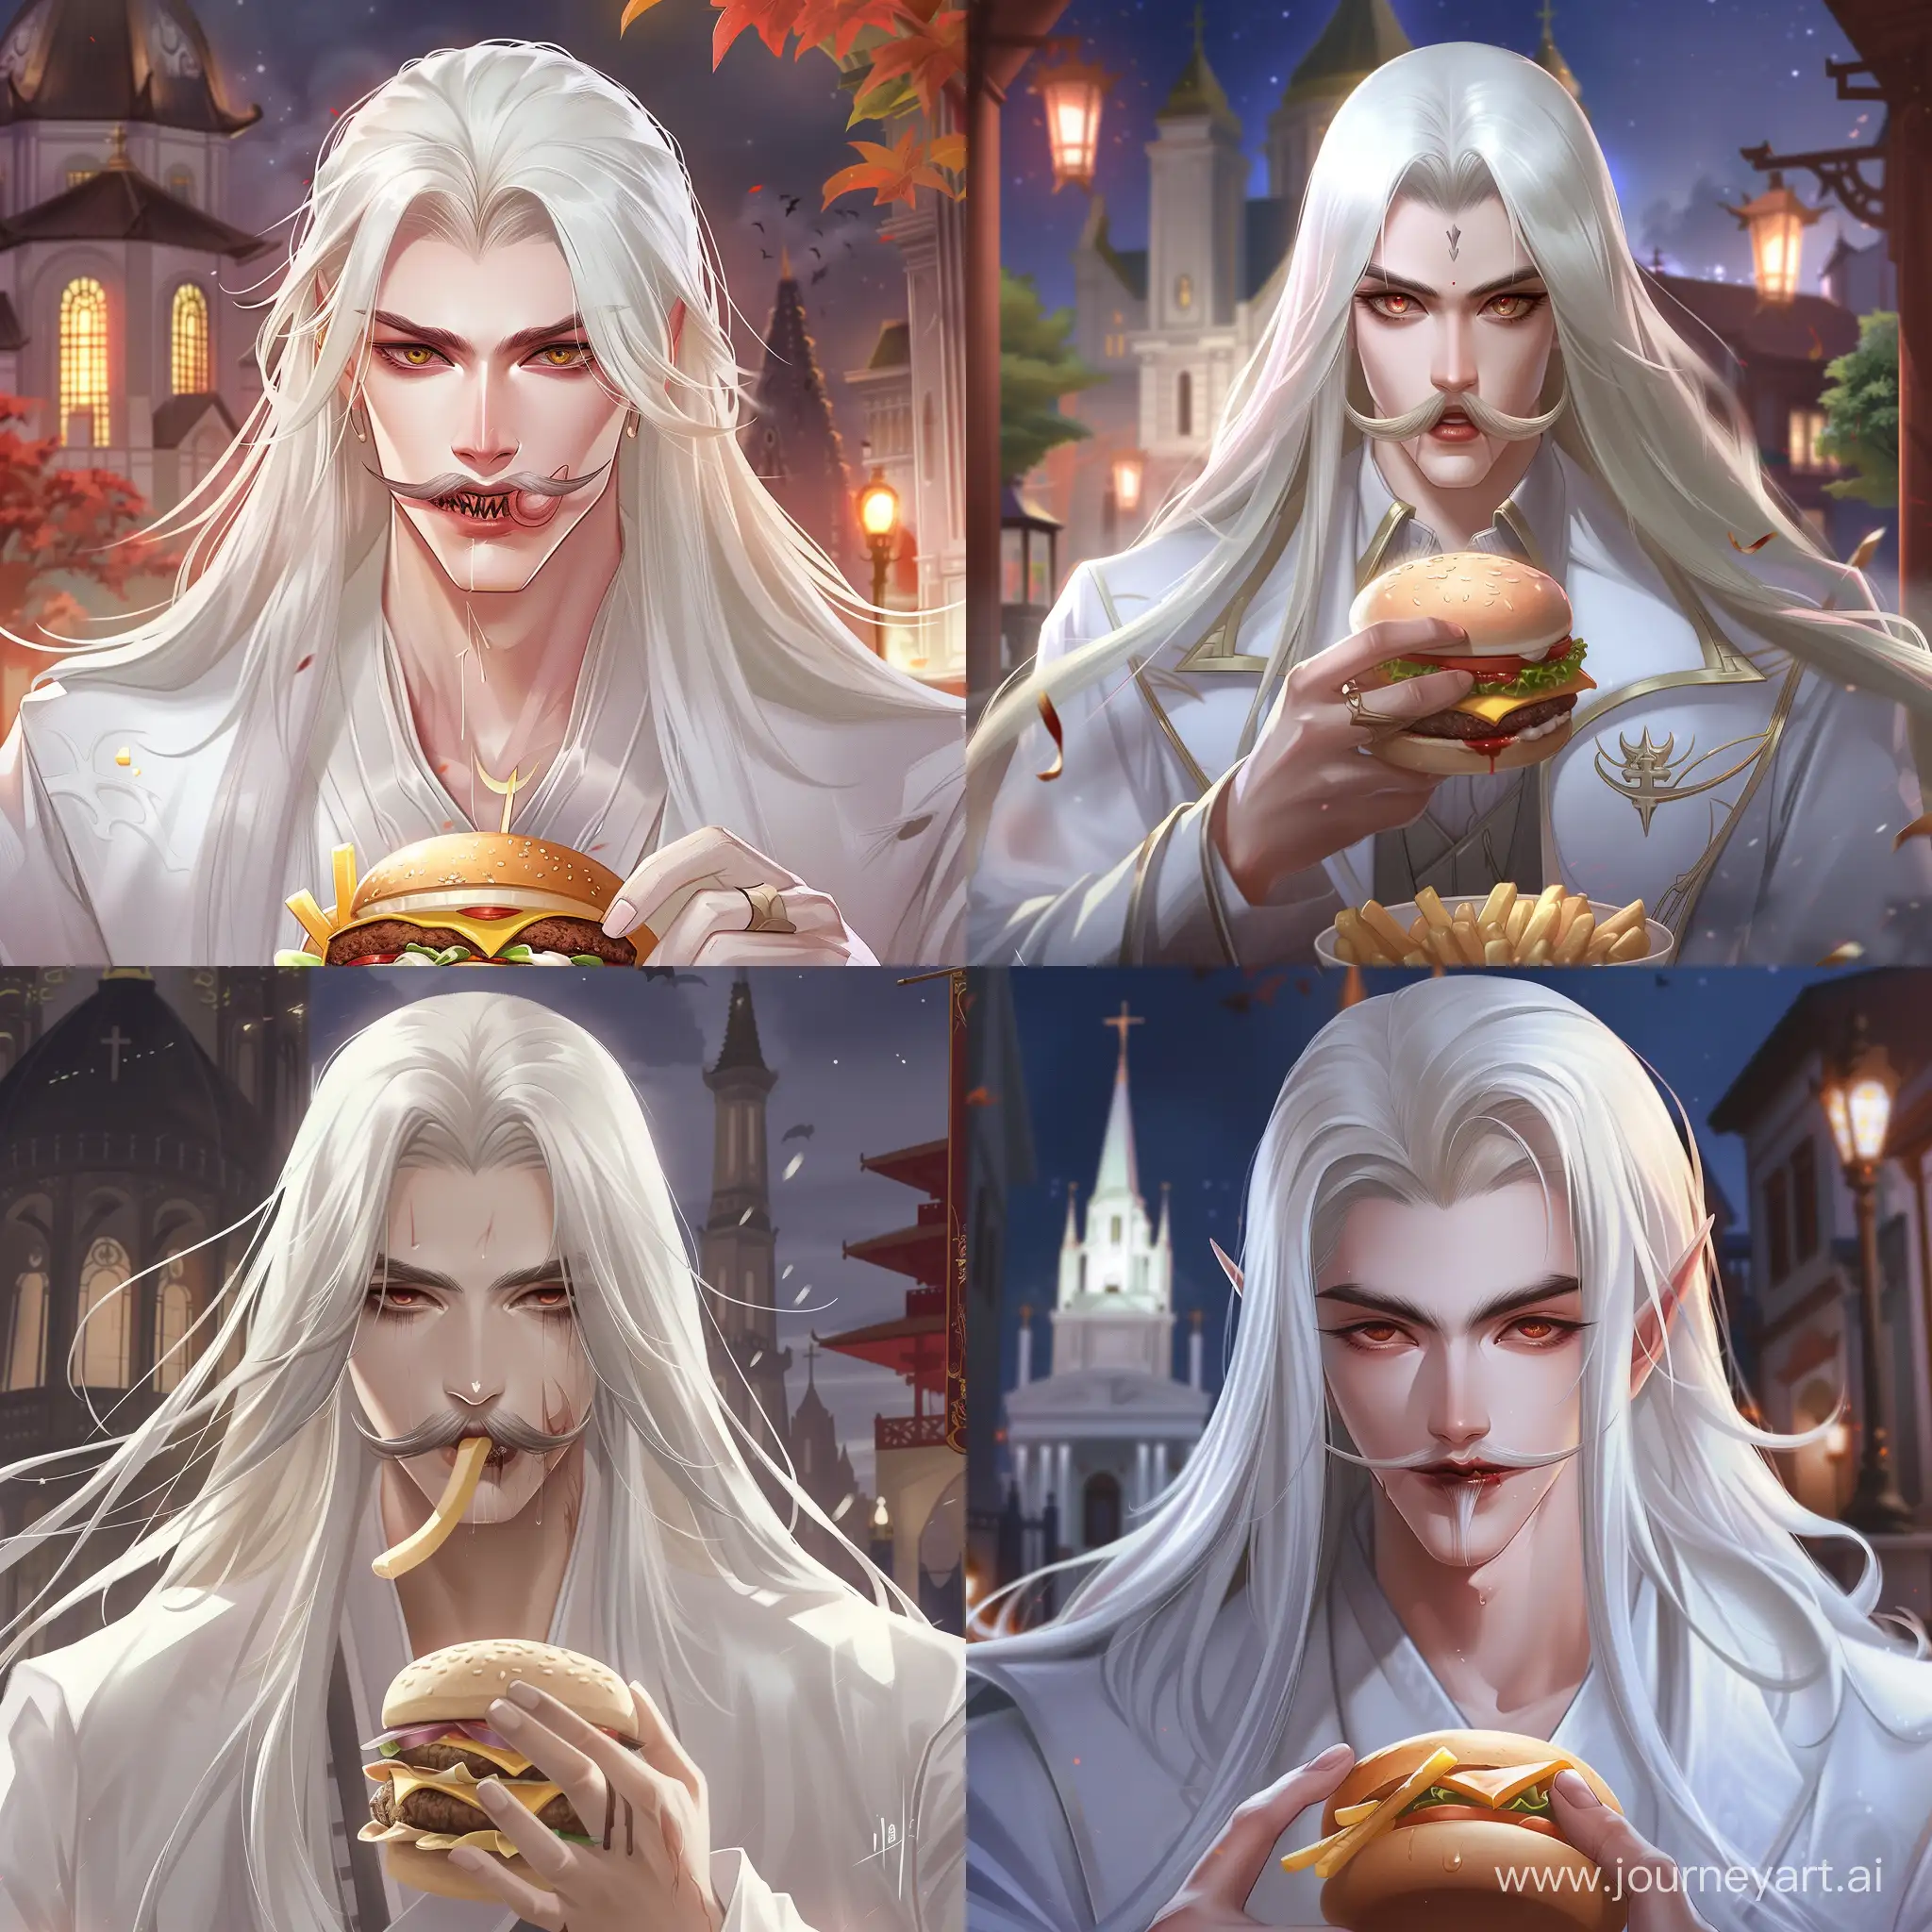 Enigmatic-Vampire-Lord-Devours-Midnight-FastFood-Feast